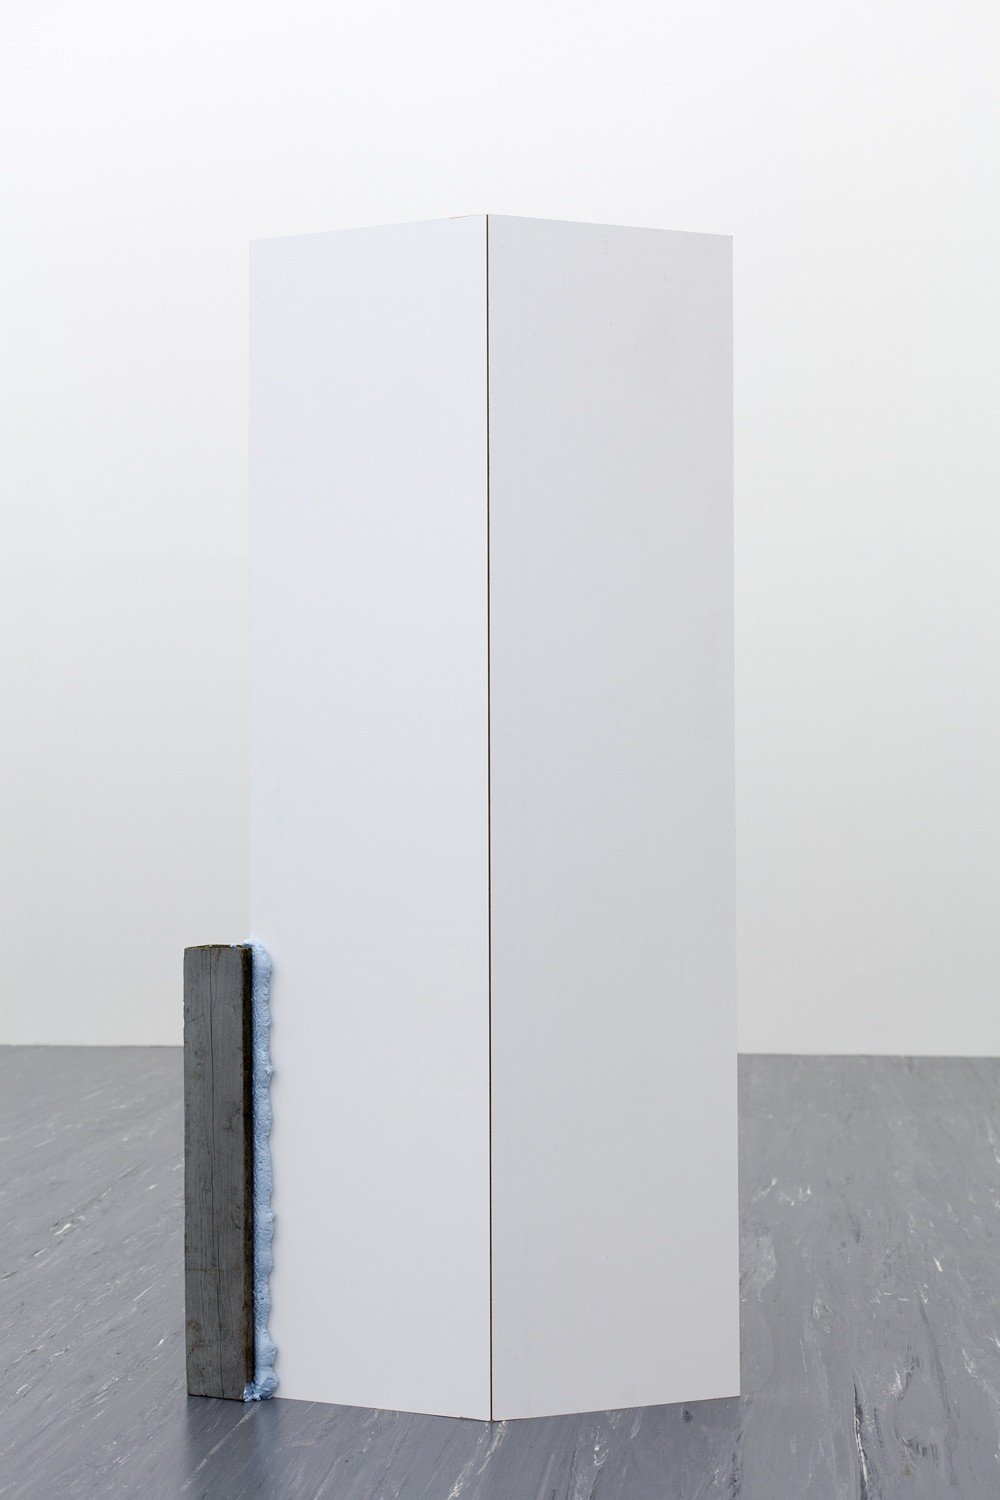 Andy Bootuntitled, 2012Wood, tape, insulation foam156 x 75 x 20 cm